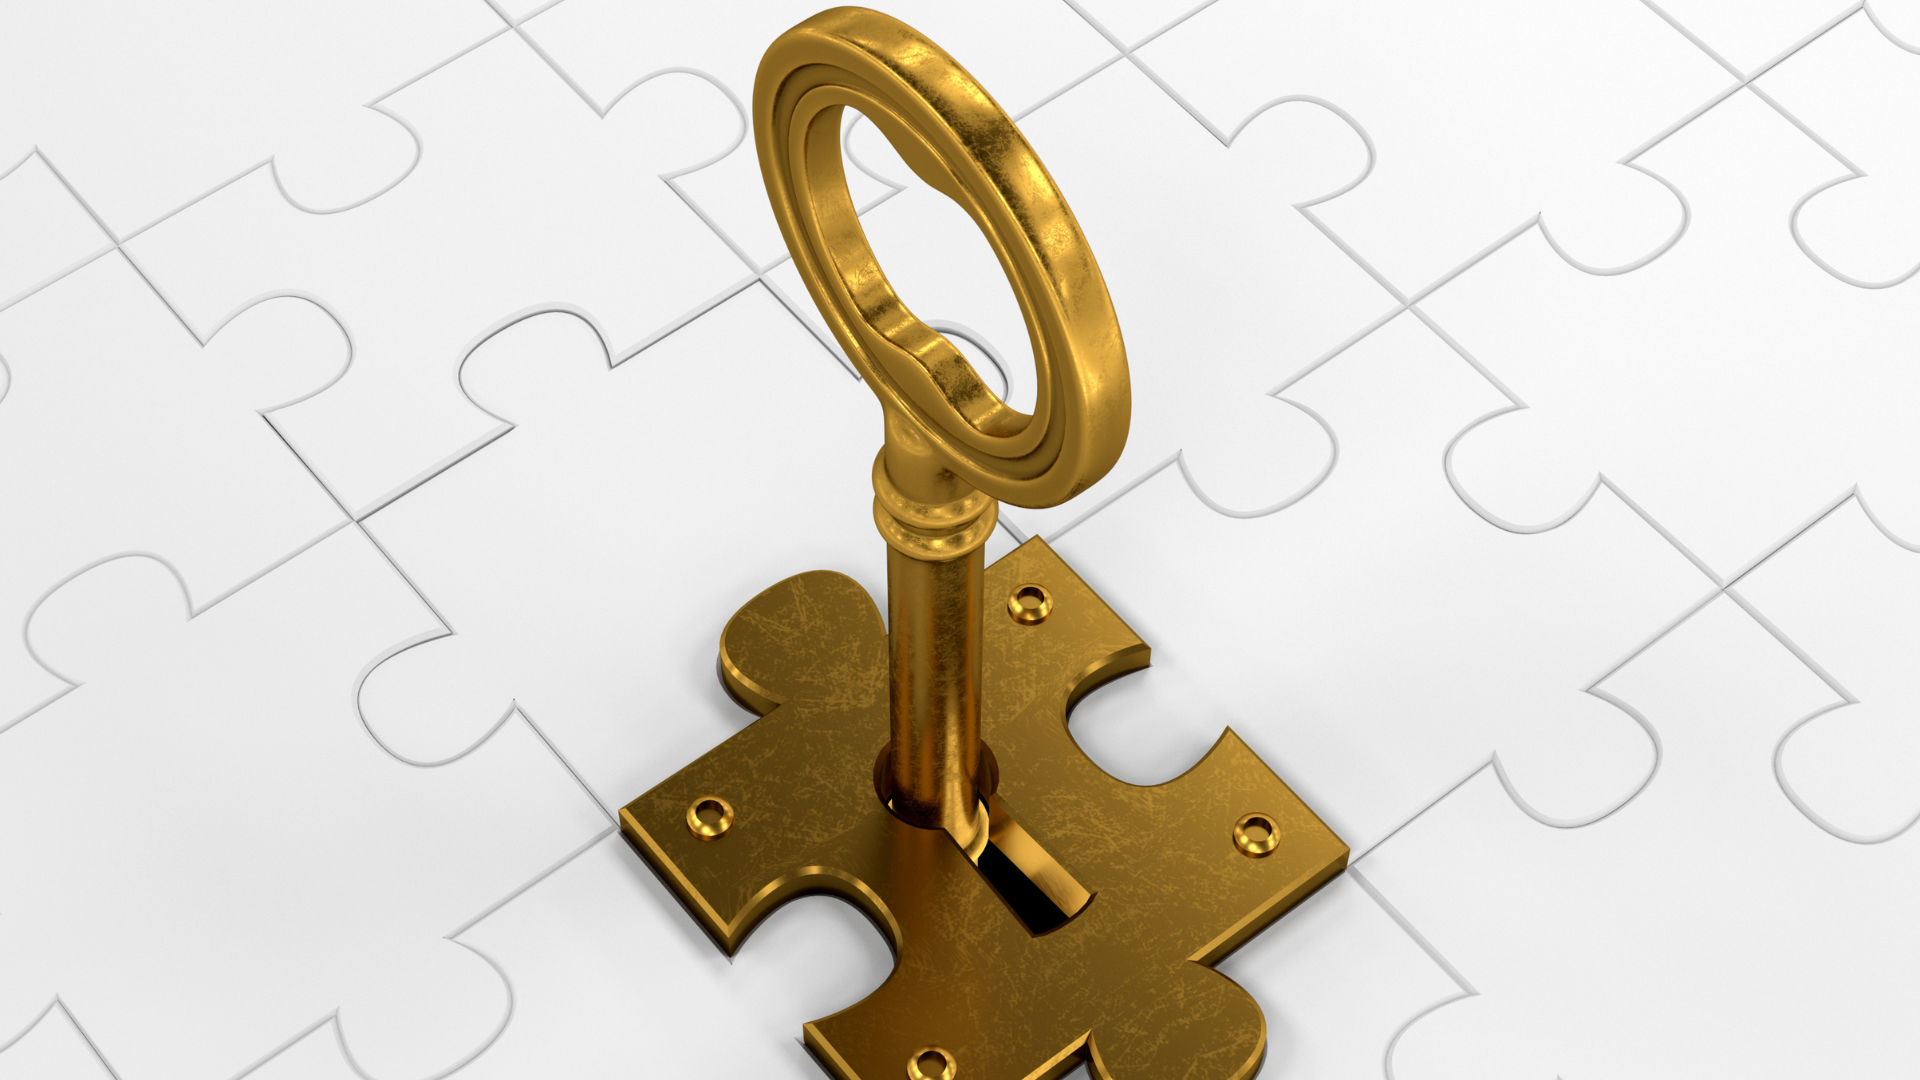 Golden key open a puzzle piece shaped lock